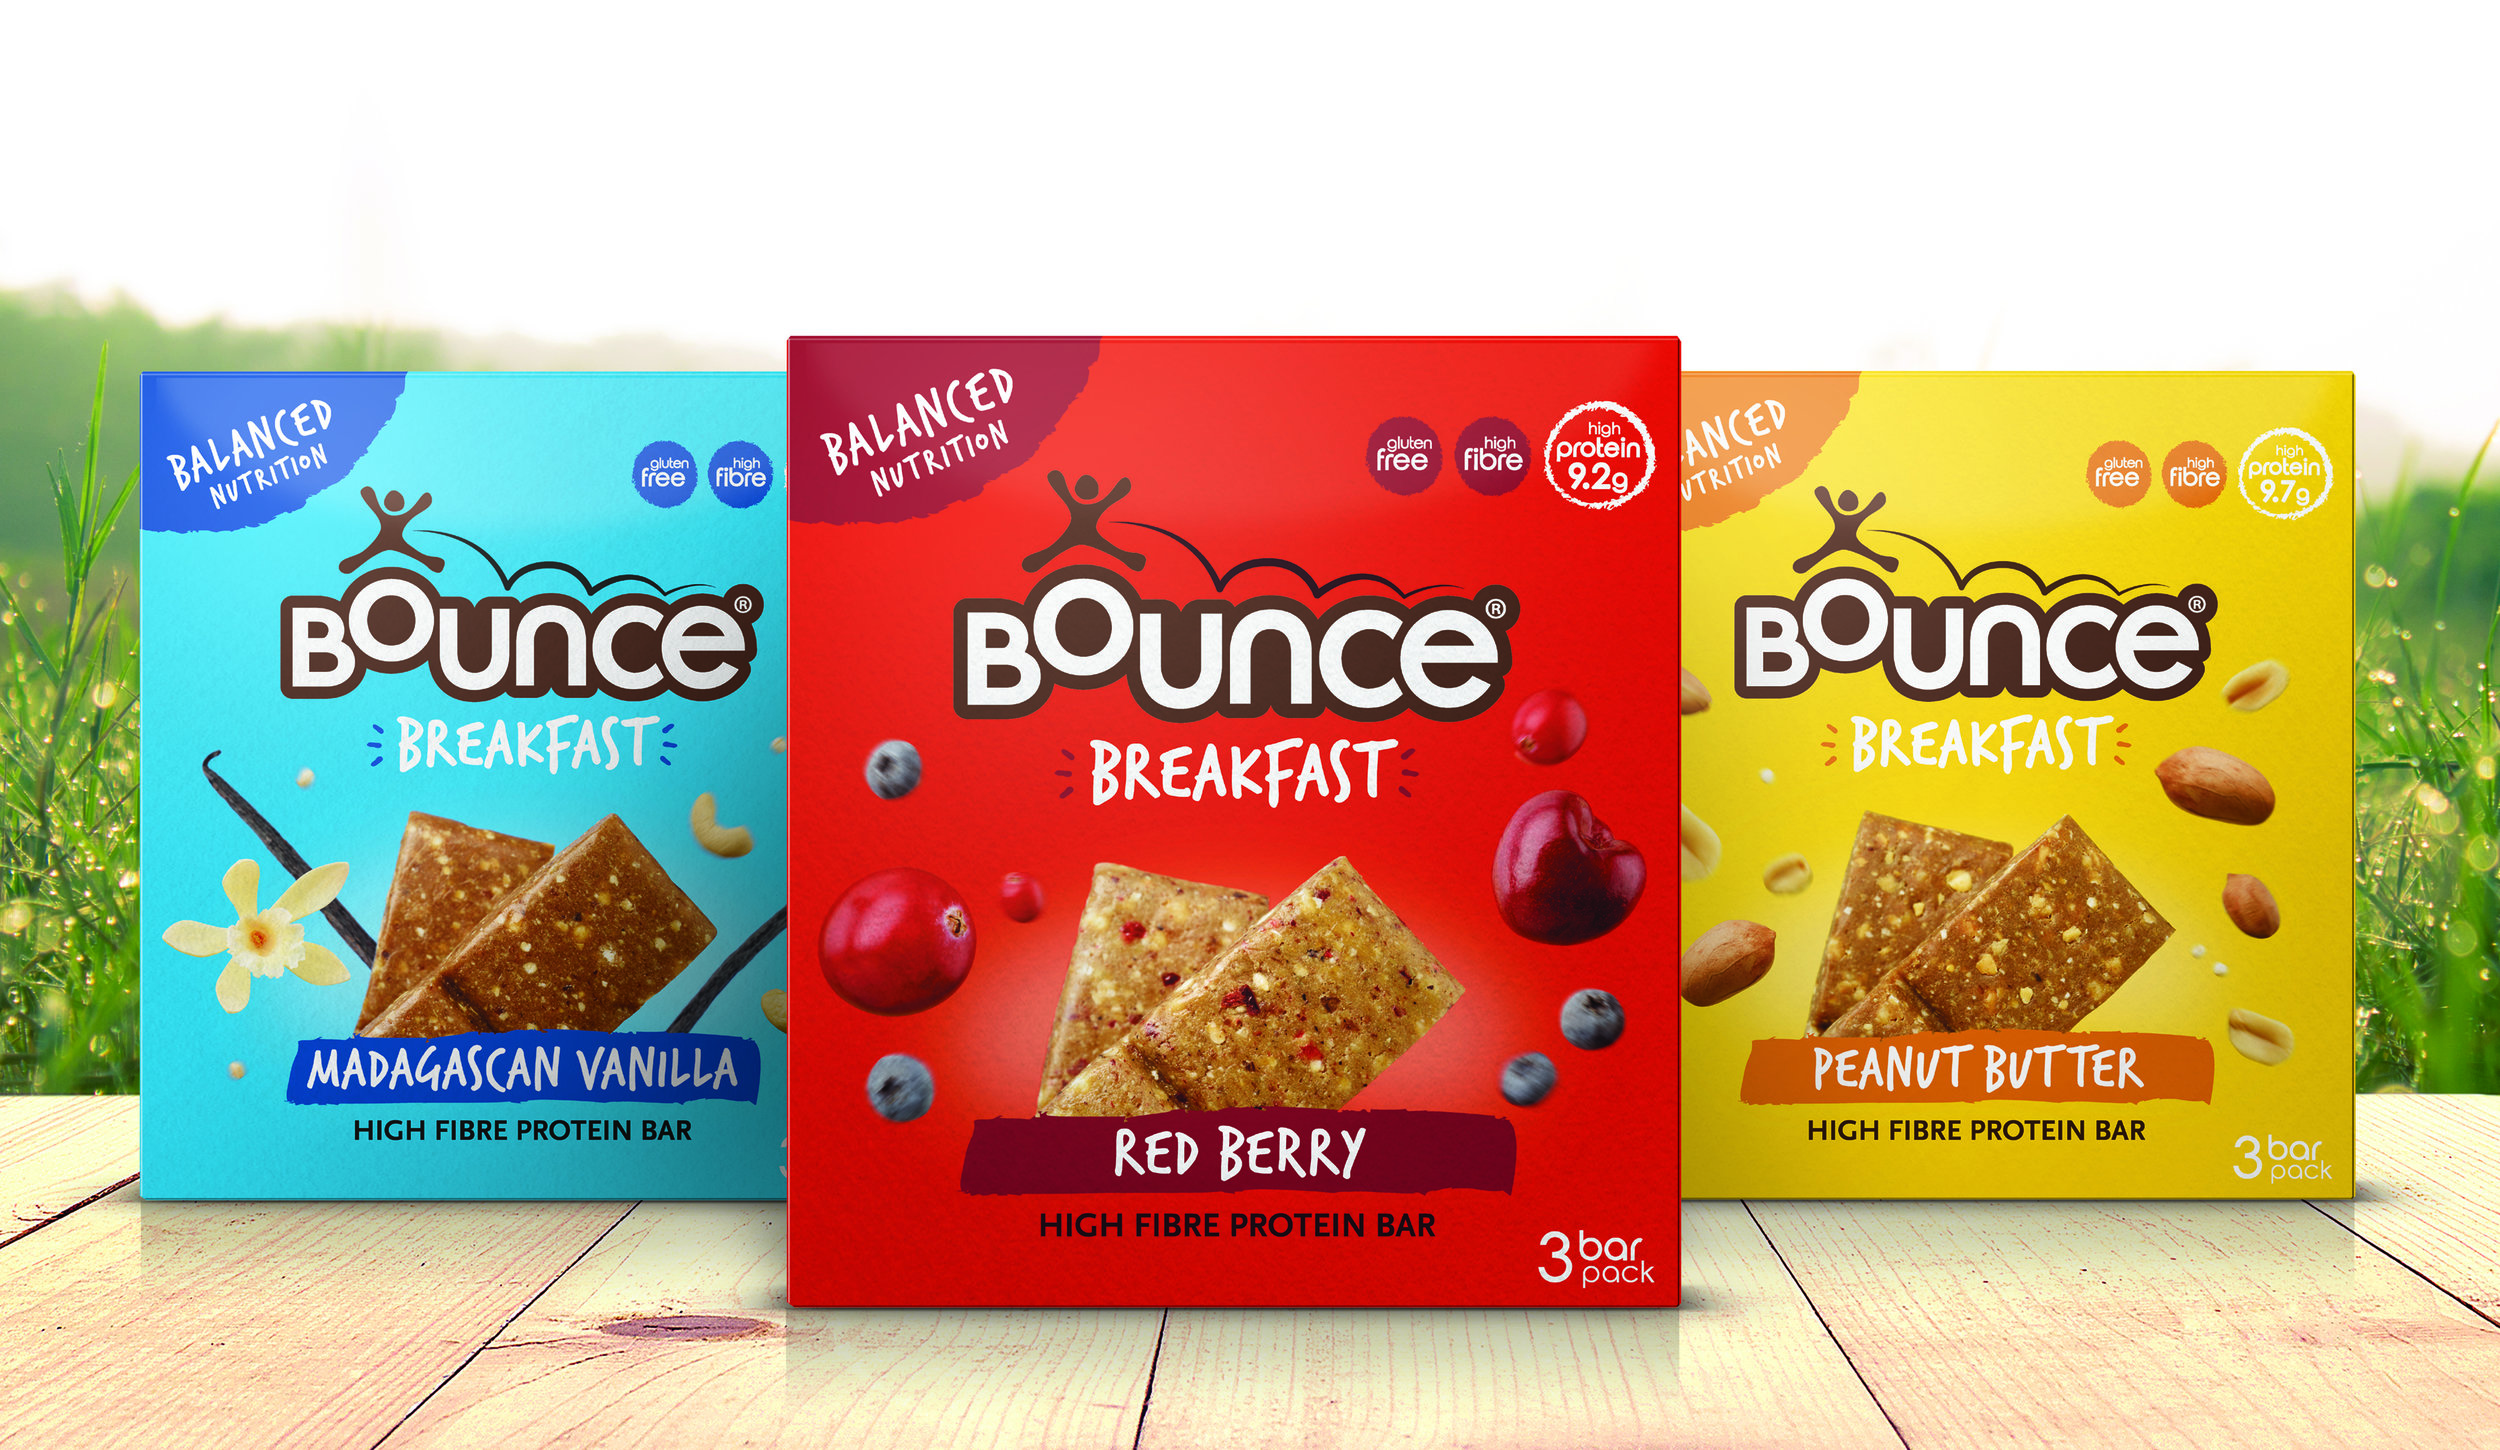 Brand and Packaging Design Gives Breakfast Added Bounce